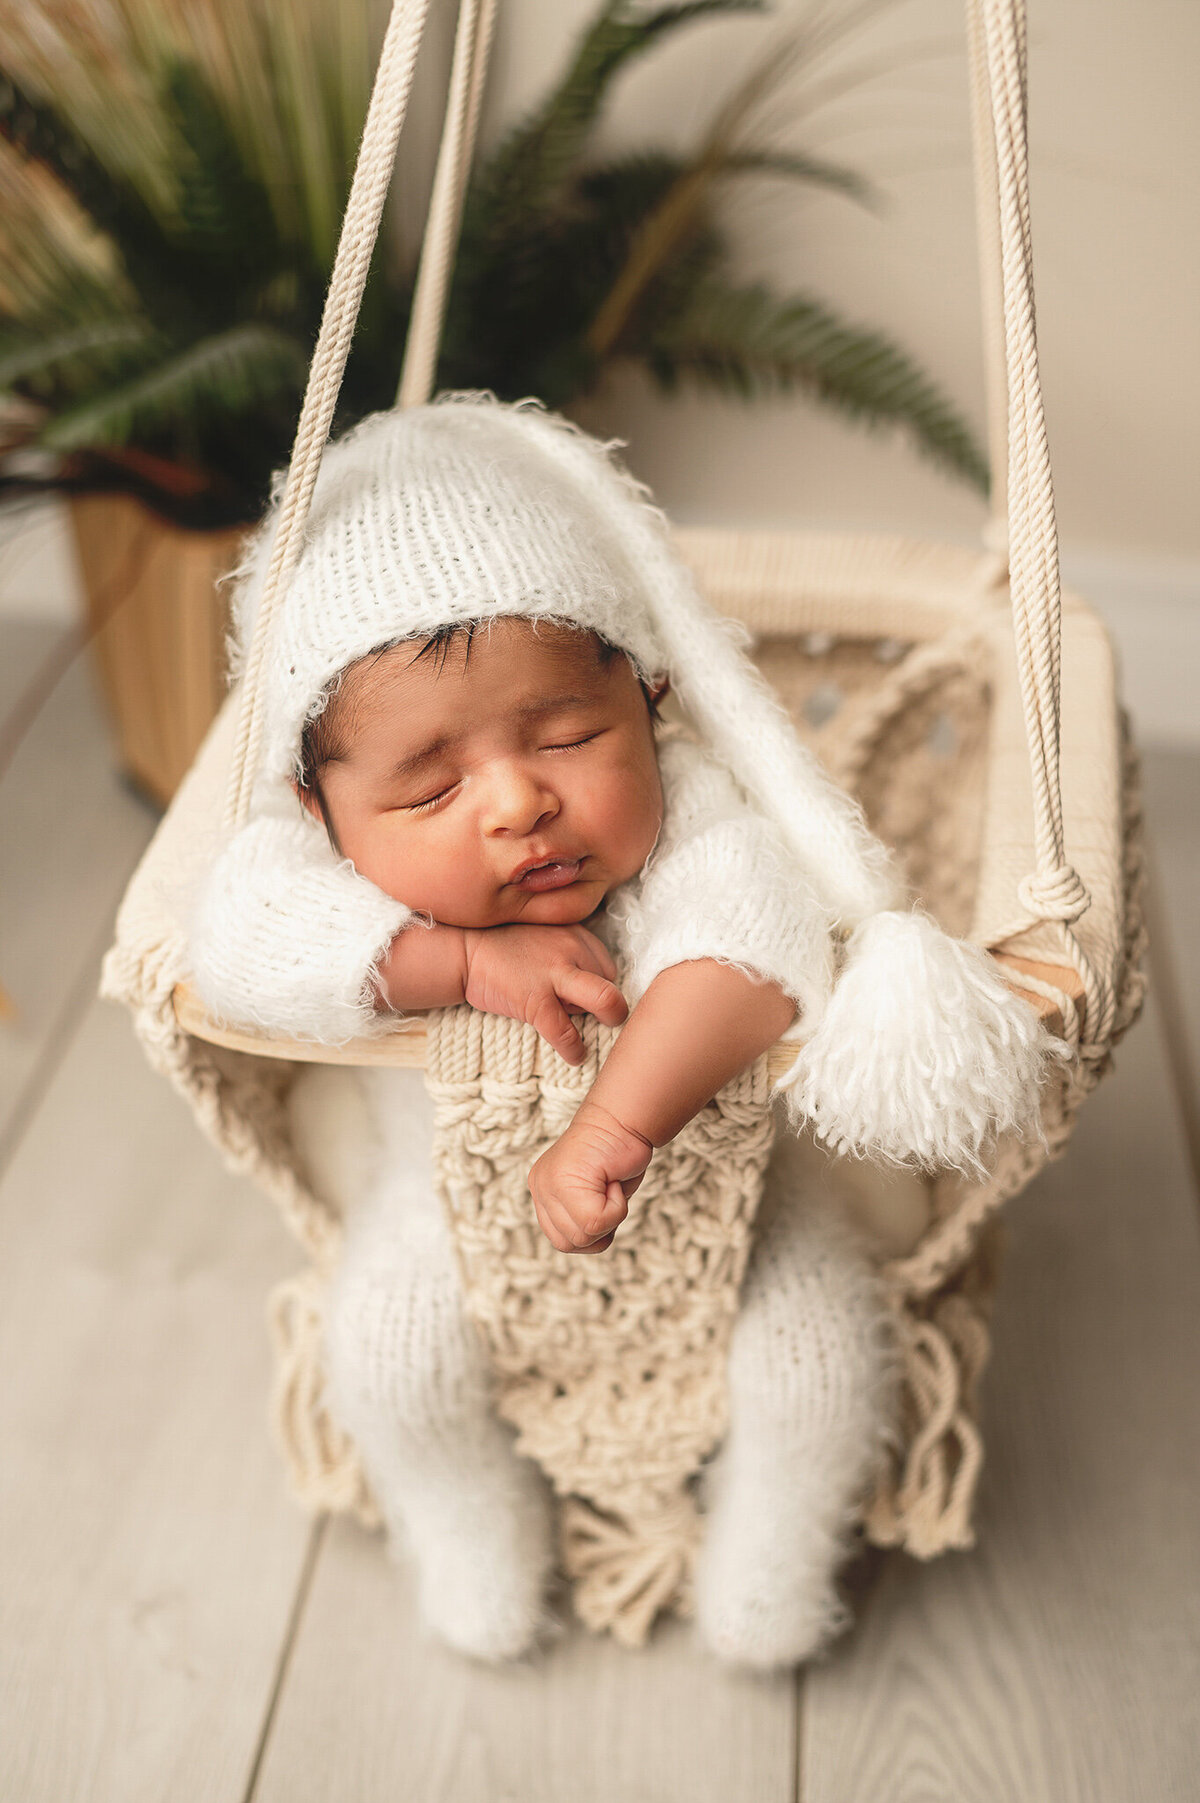 Infant baby boy in a white sleeper and hat sleeping in a macrame swing in his portrait studio session.